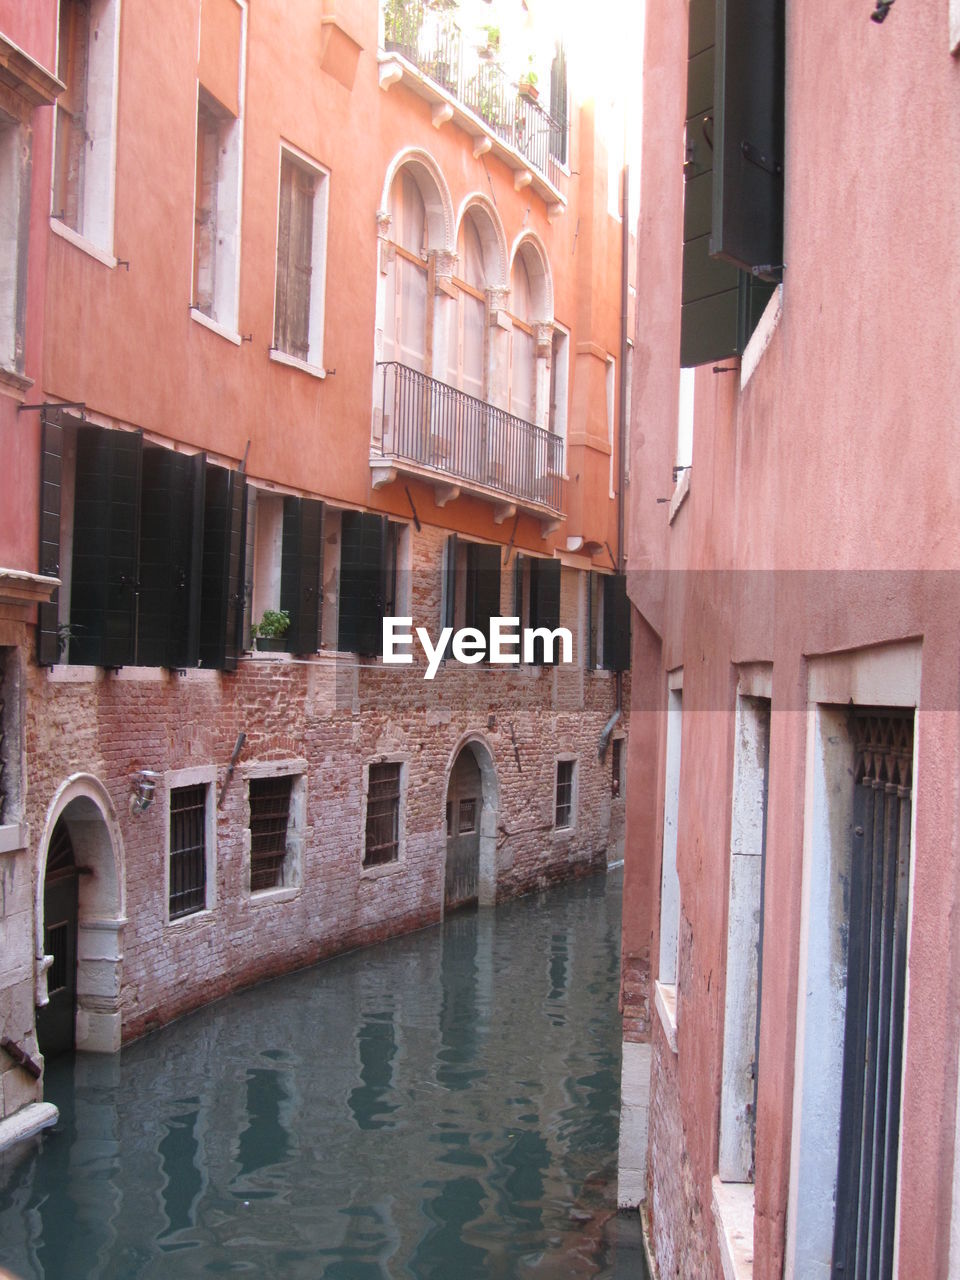 VIEW OF BUILDINGS IN A WATER